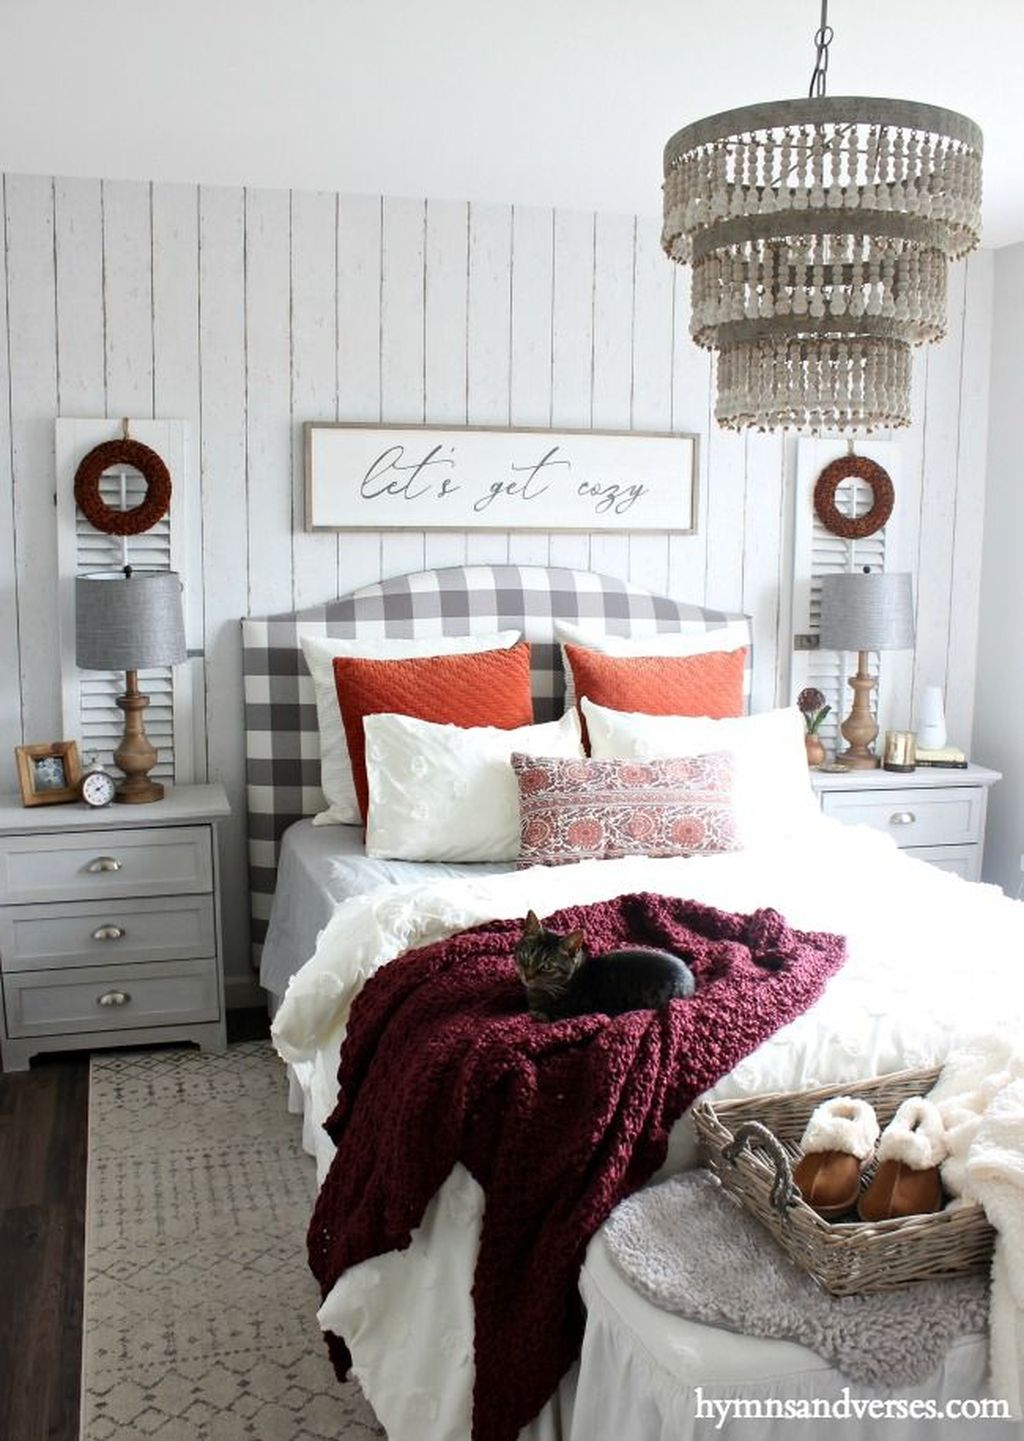 Fabulous Interior Design Ideas For Fall And Winter To Try Now14